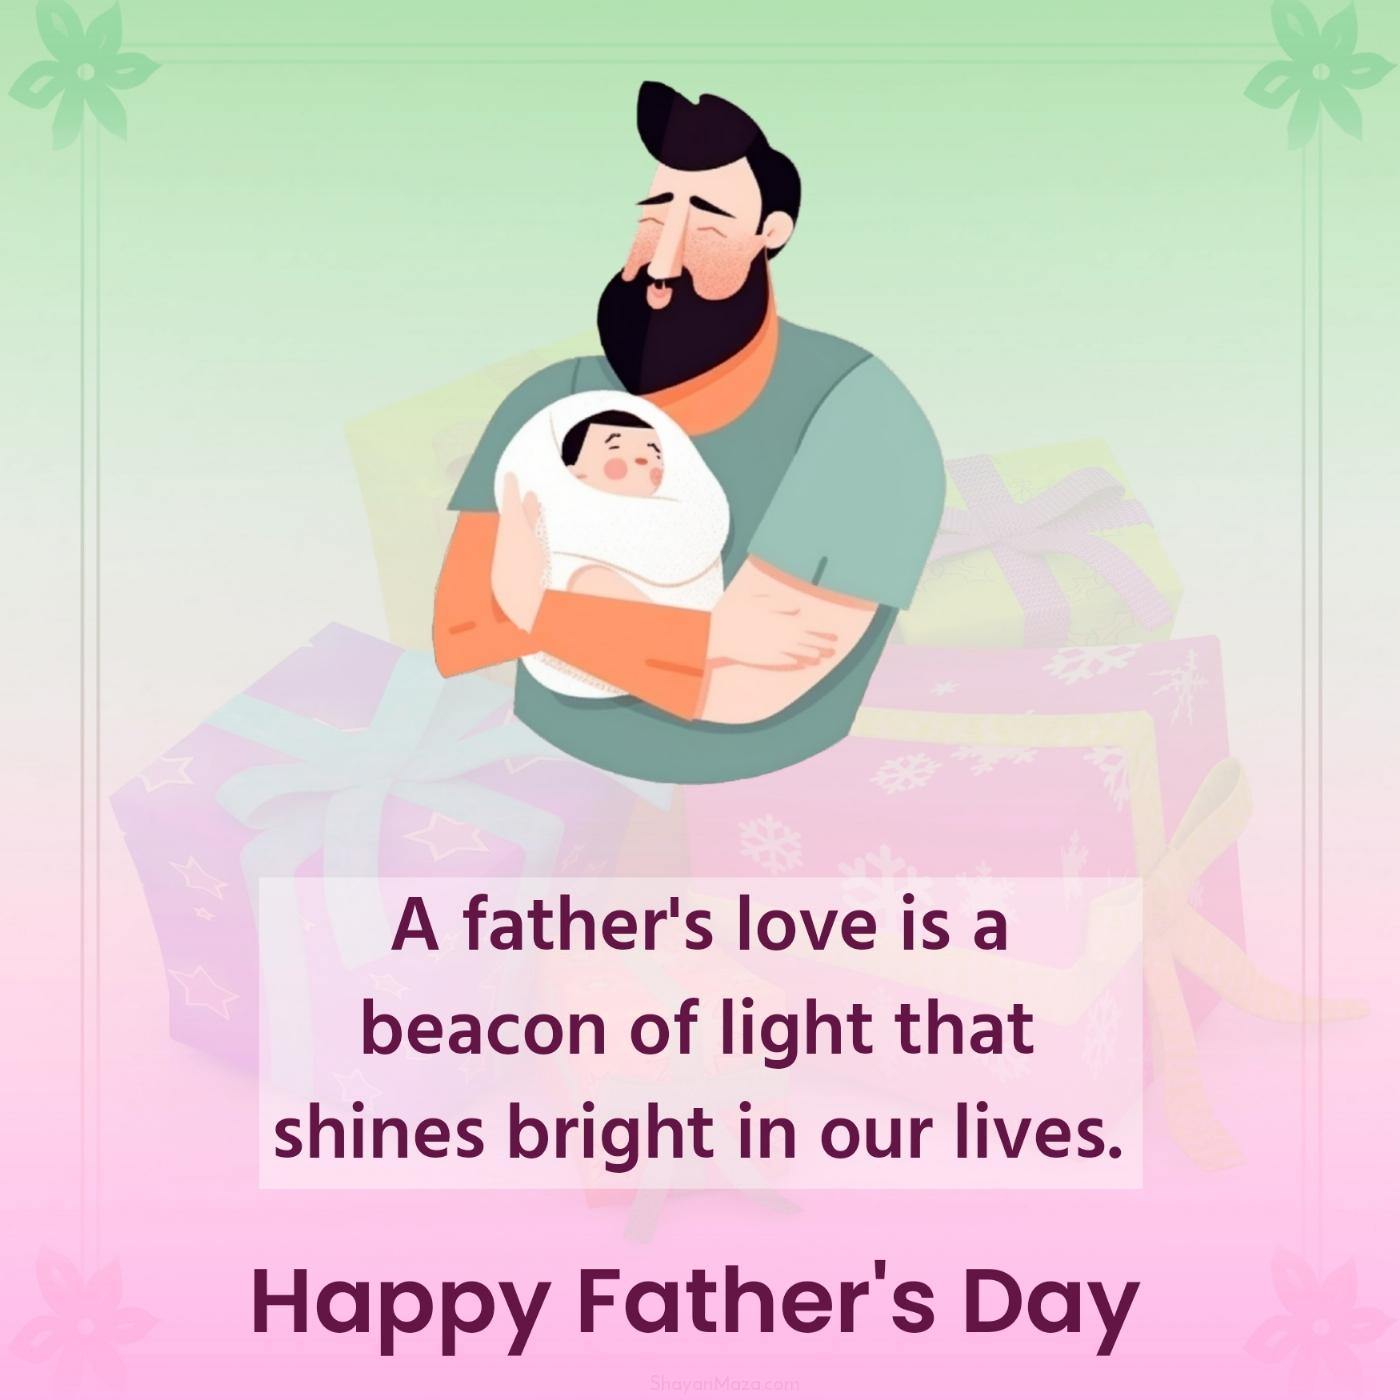 A father's love is a beacon of light that shines